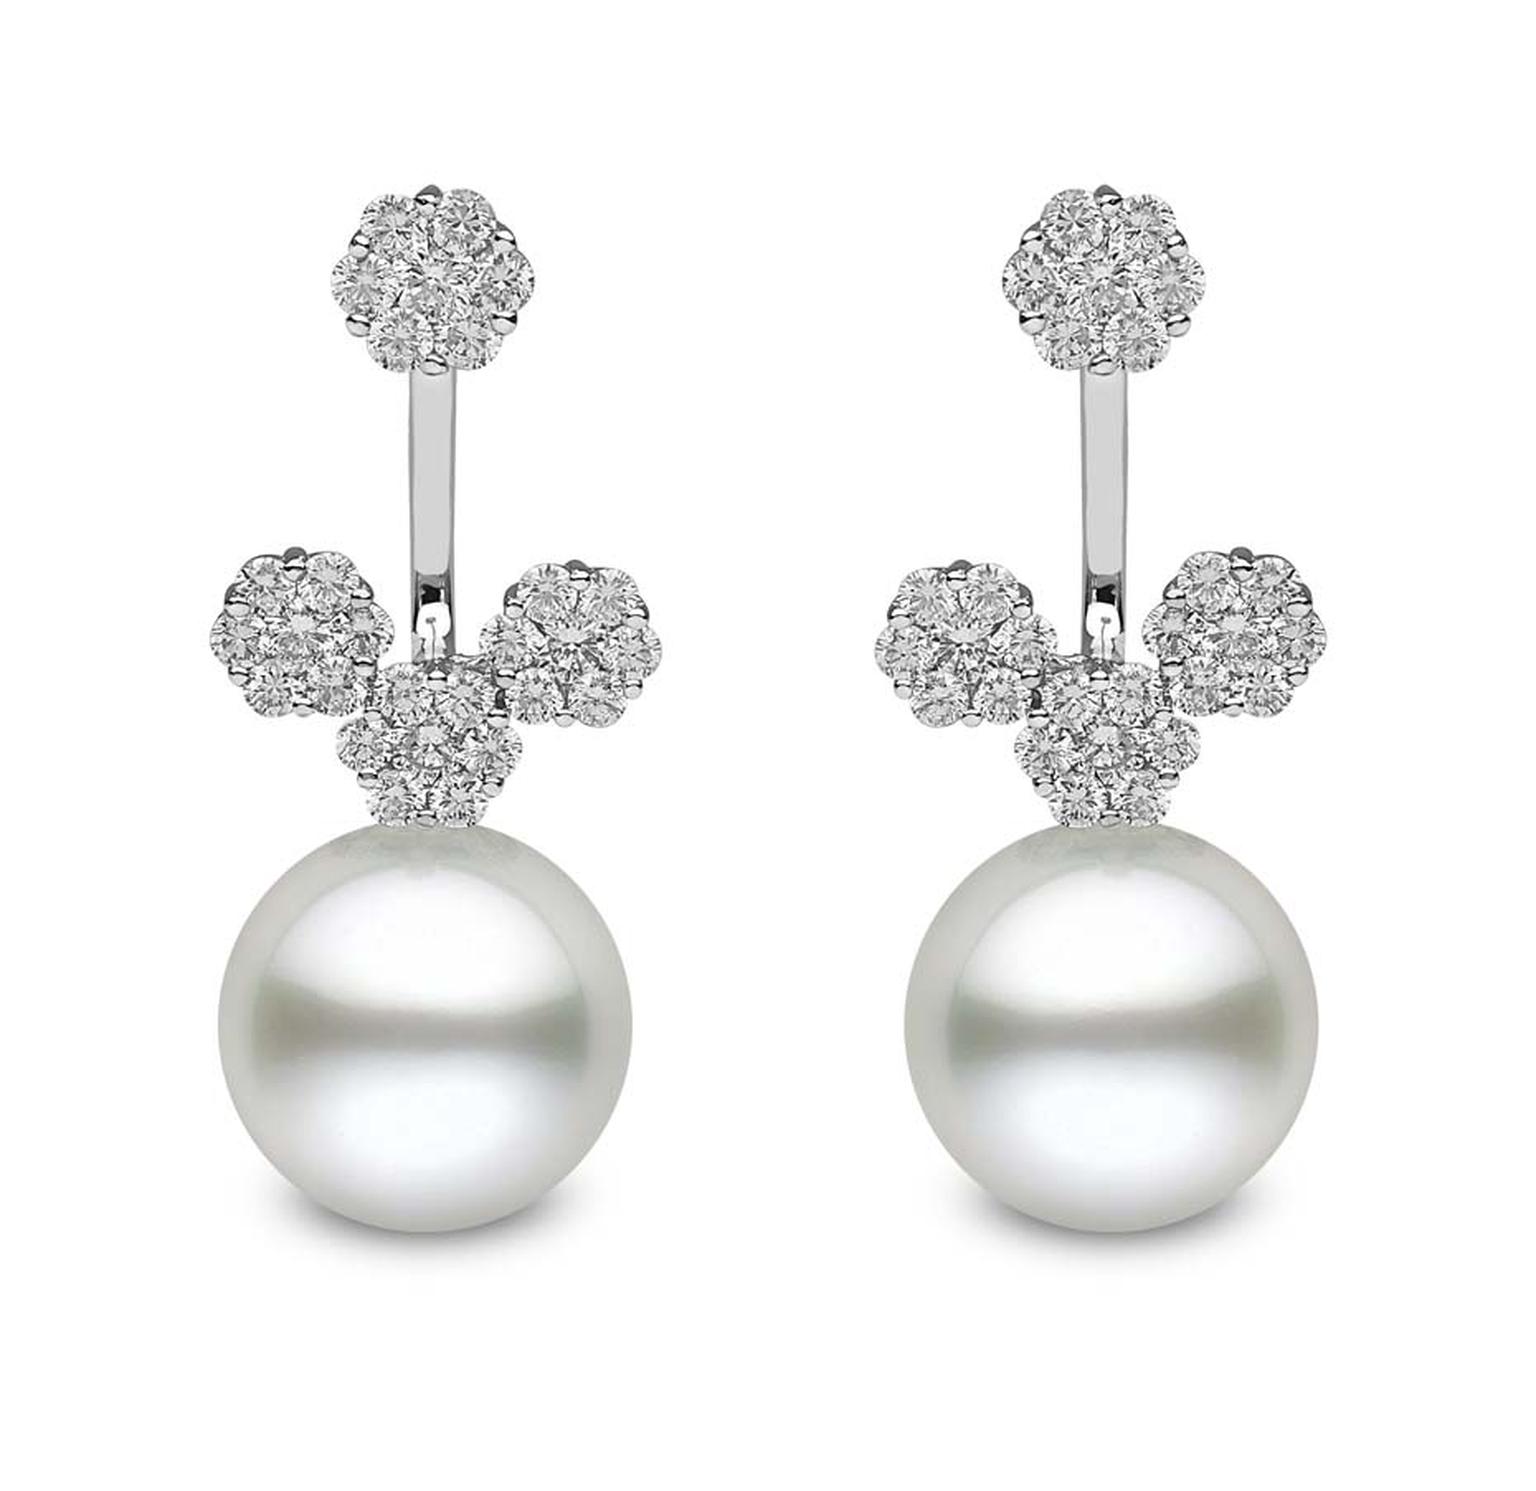 YOKO London front/back earrings with white South Sea pearls and diamonds.